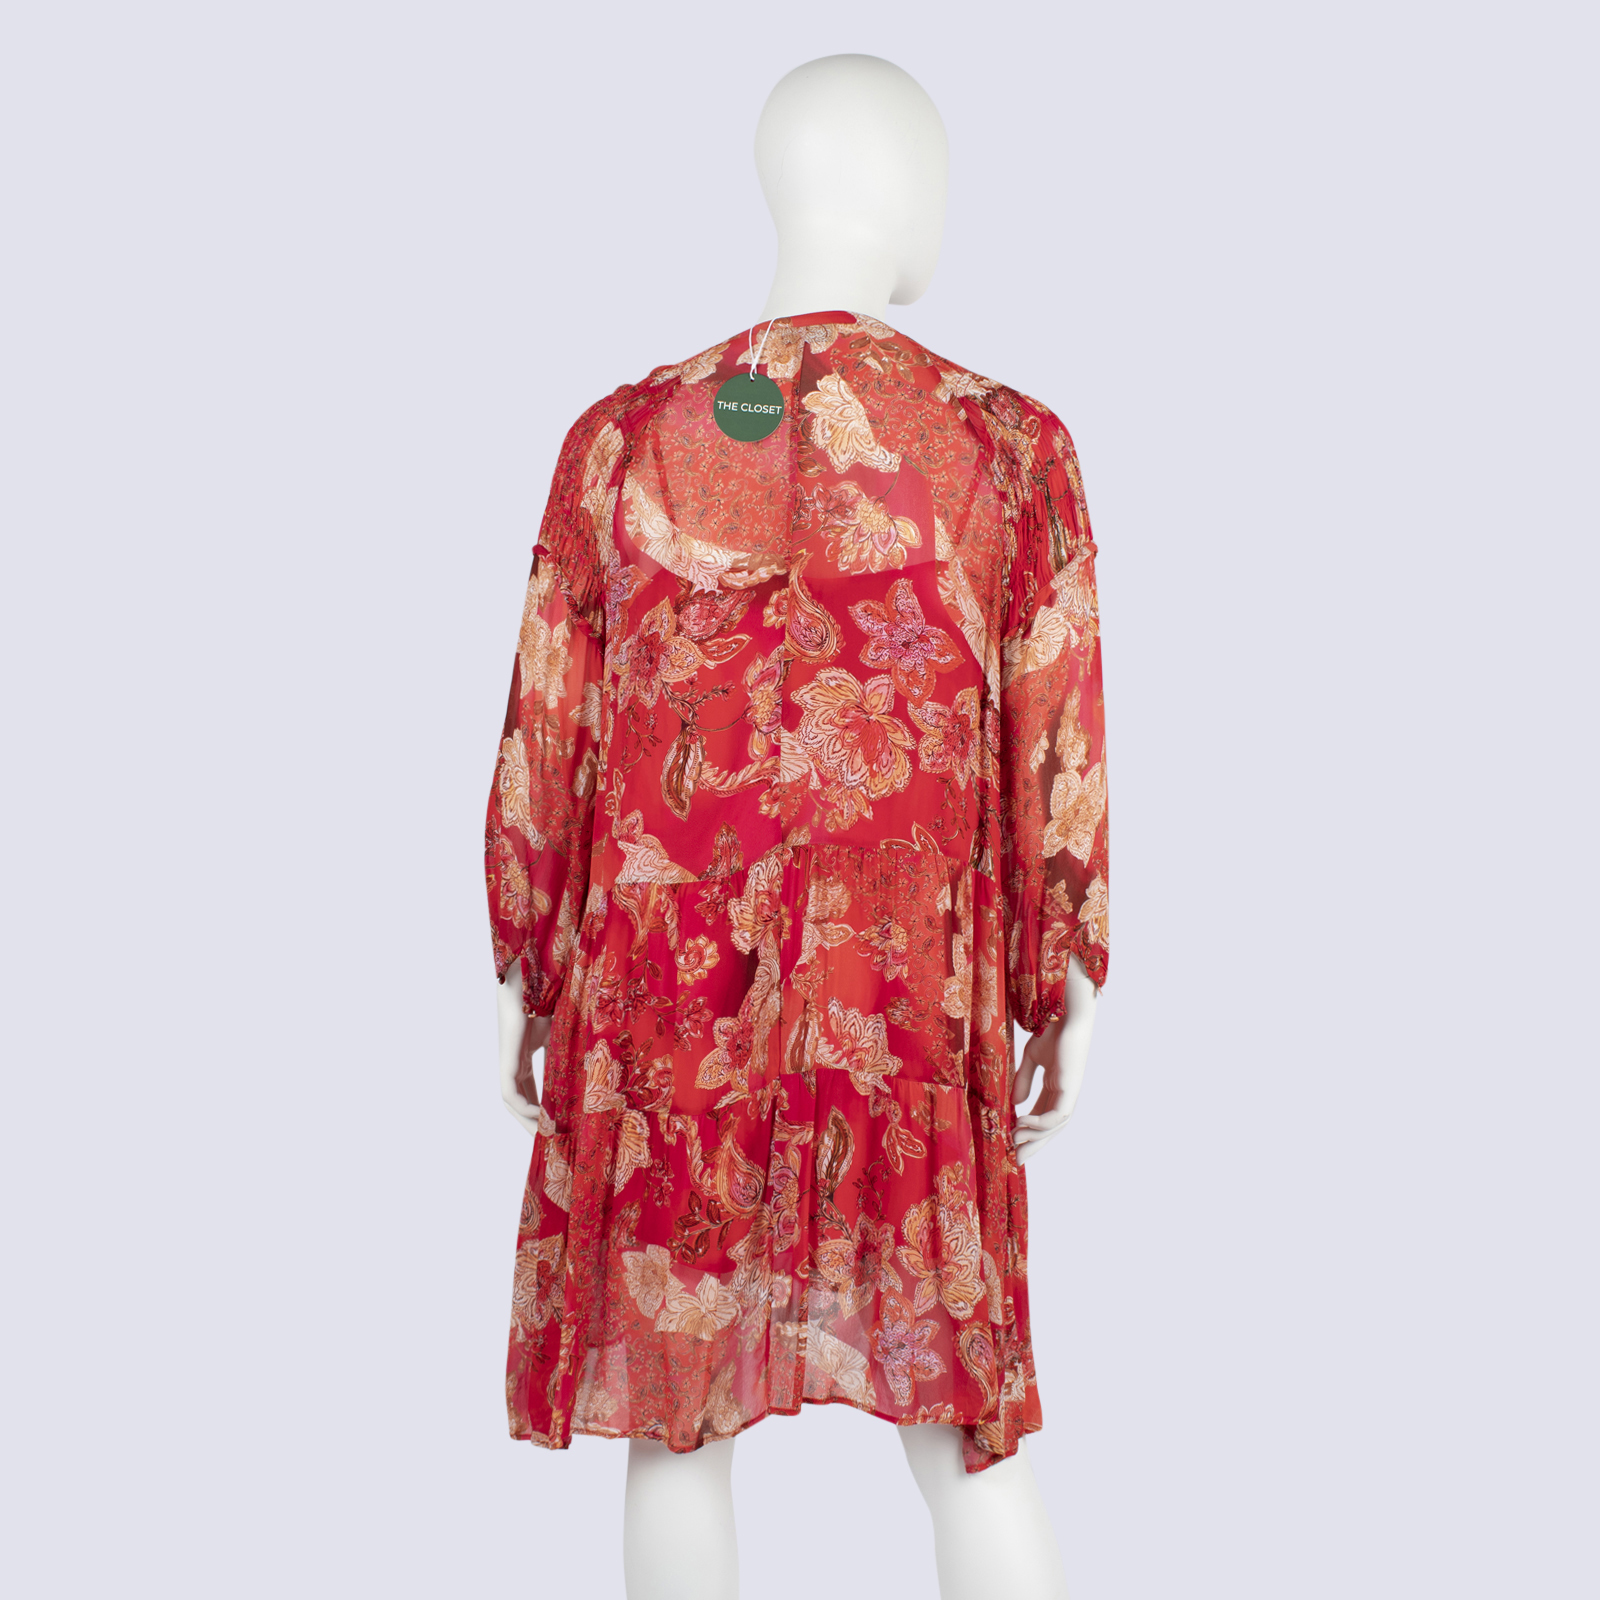 Sussan Red Floral Sheer Dress with Slip